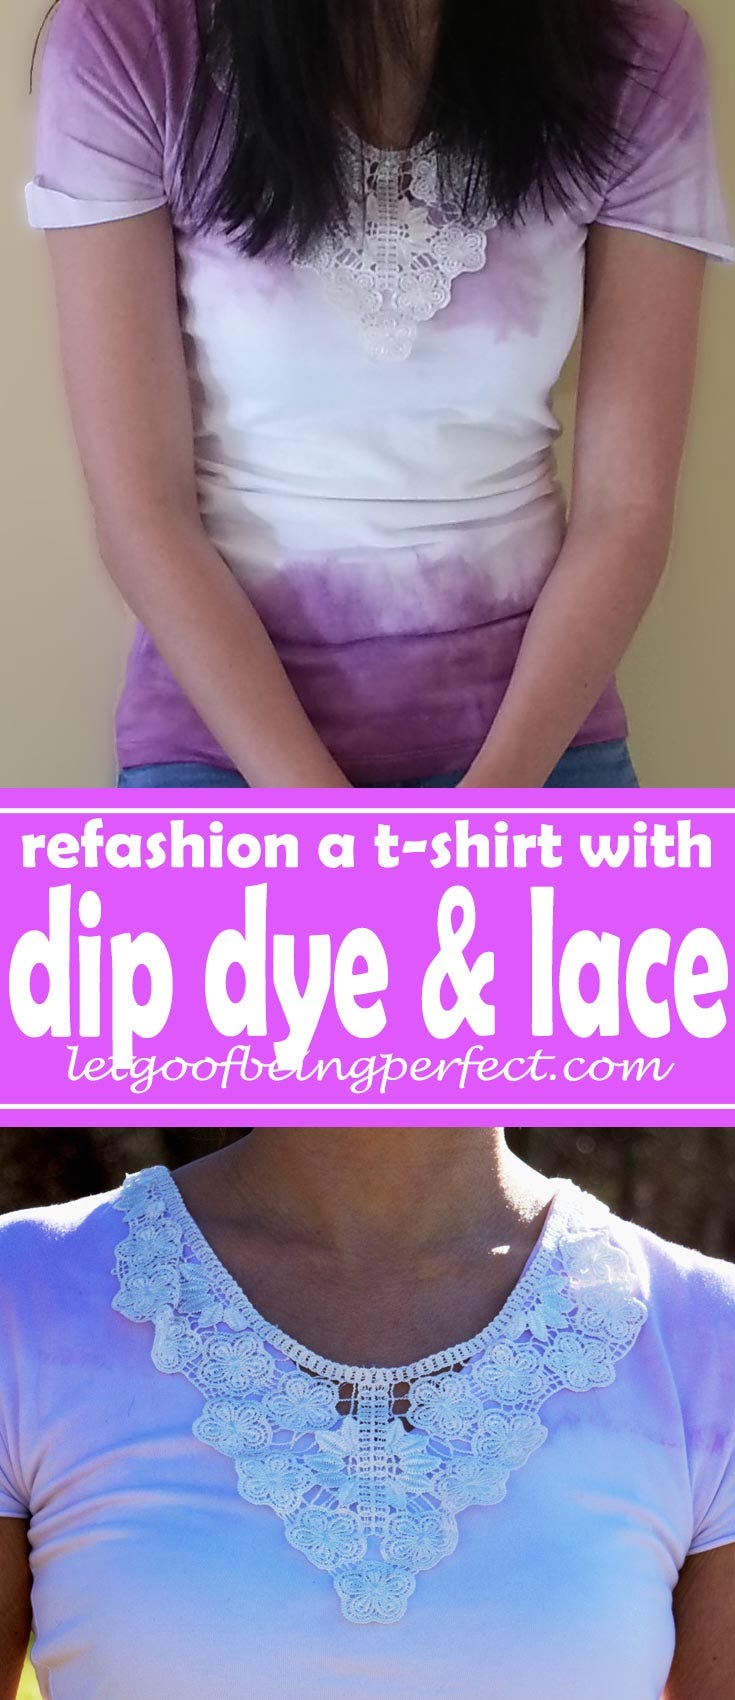 Remaking a plain white t-shirt with dip dye and lace. Step-by-step sewing tutorial with lots of pictures. #refashionista #crafting #crafts #t-shirts